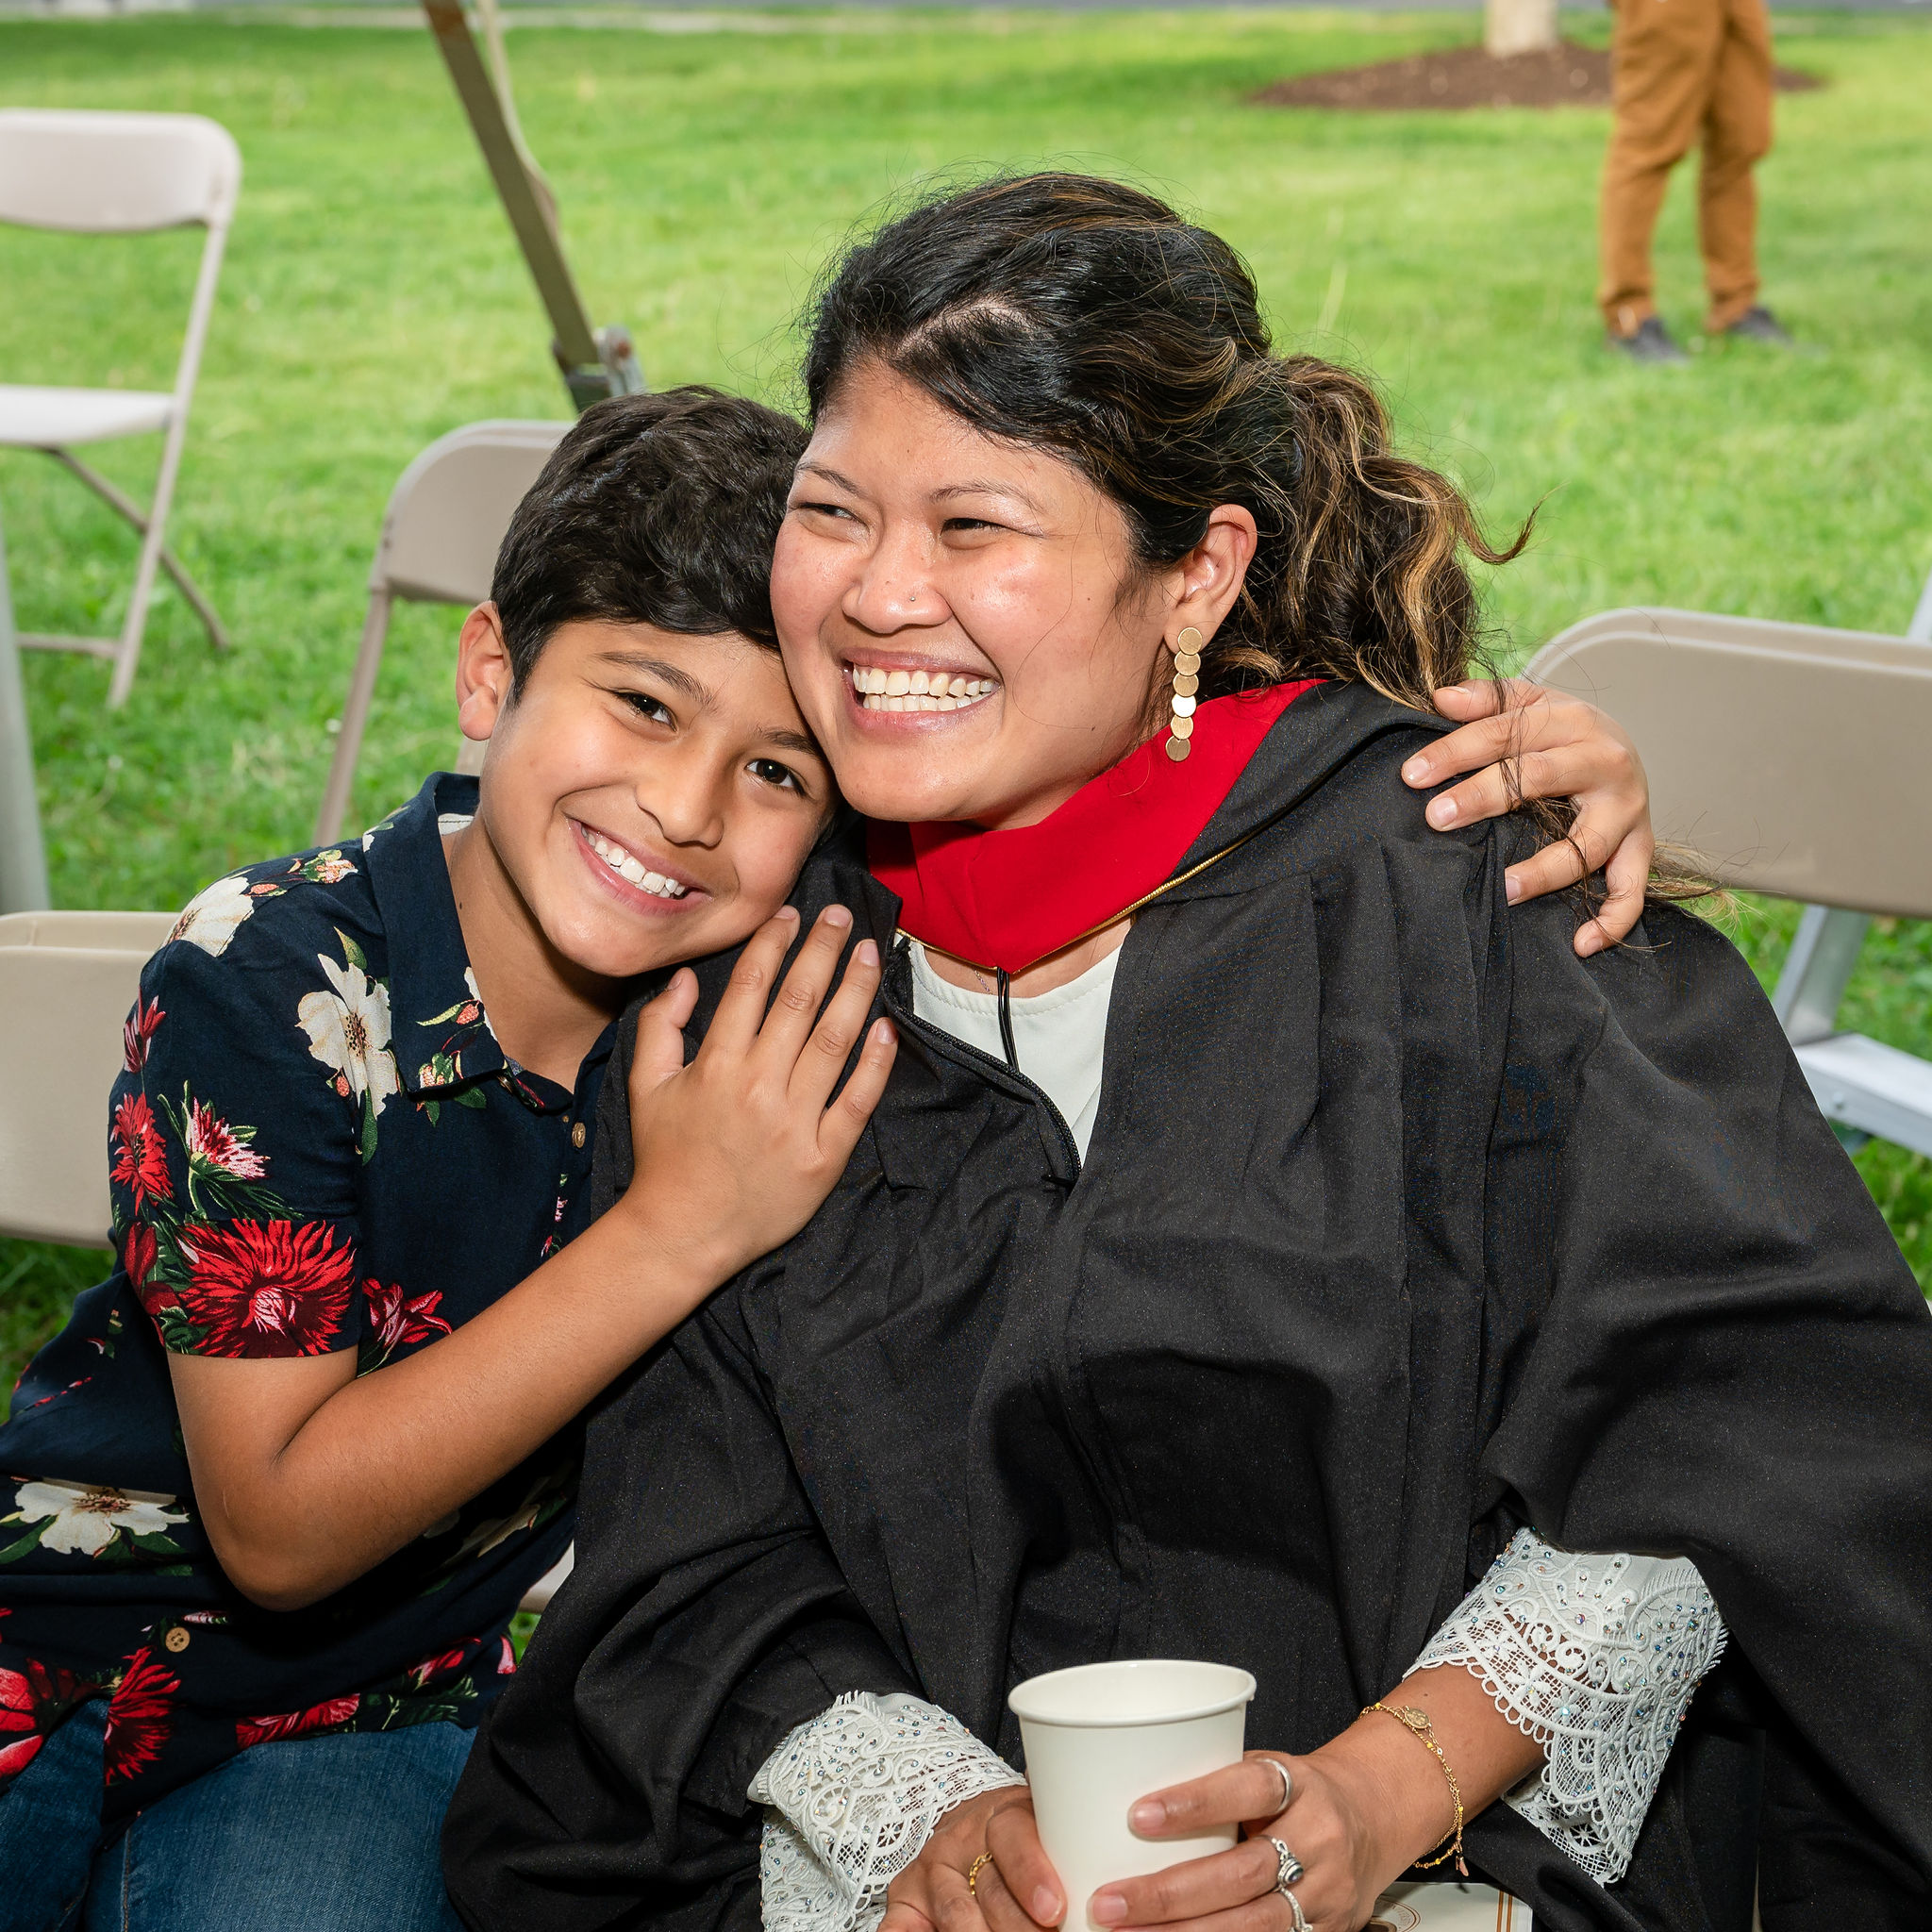 Woman graduate smiling with young boy